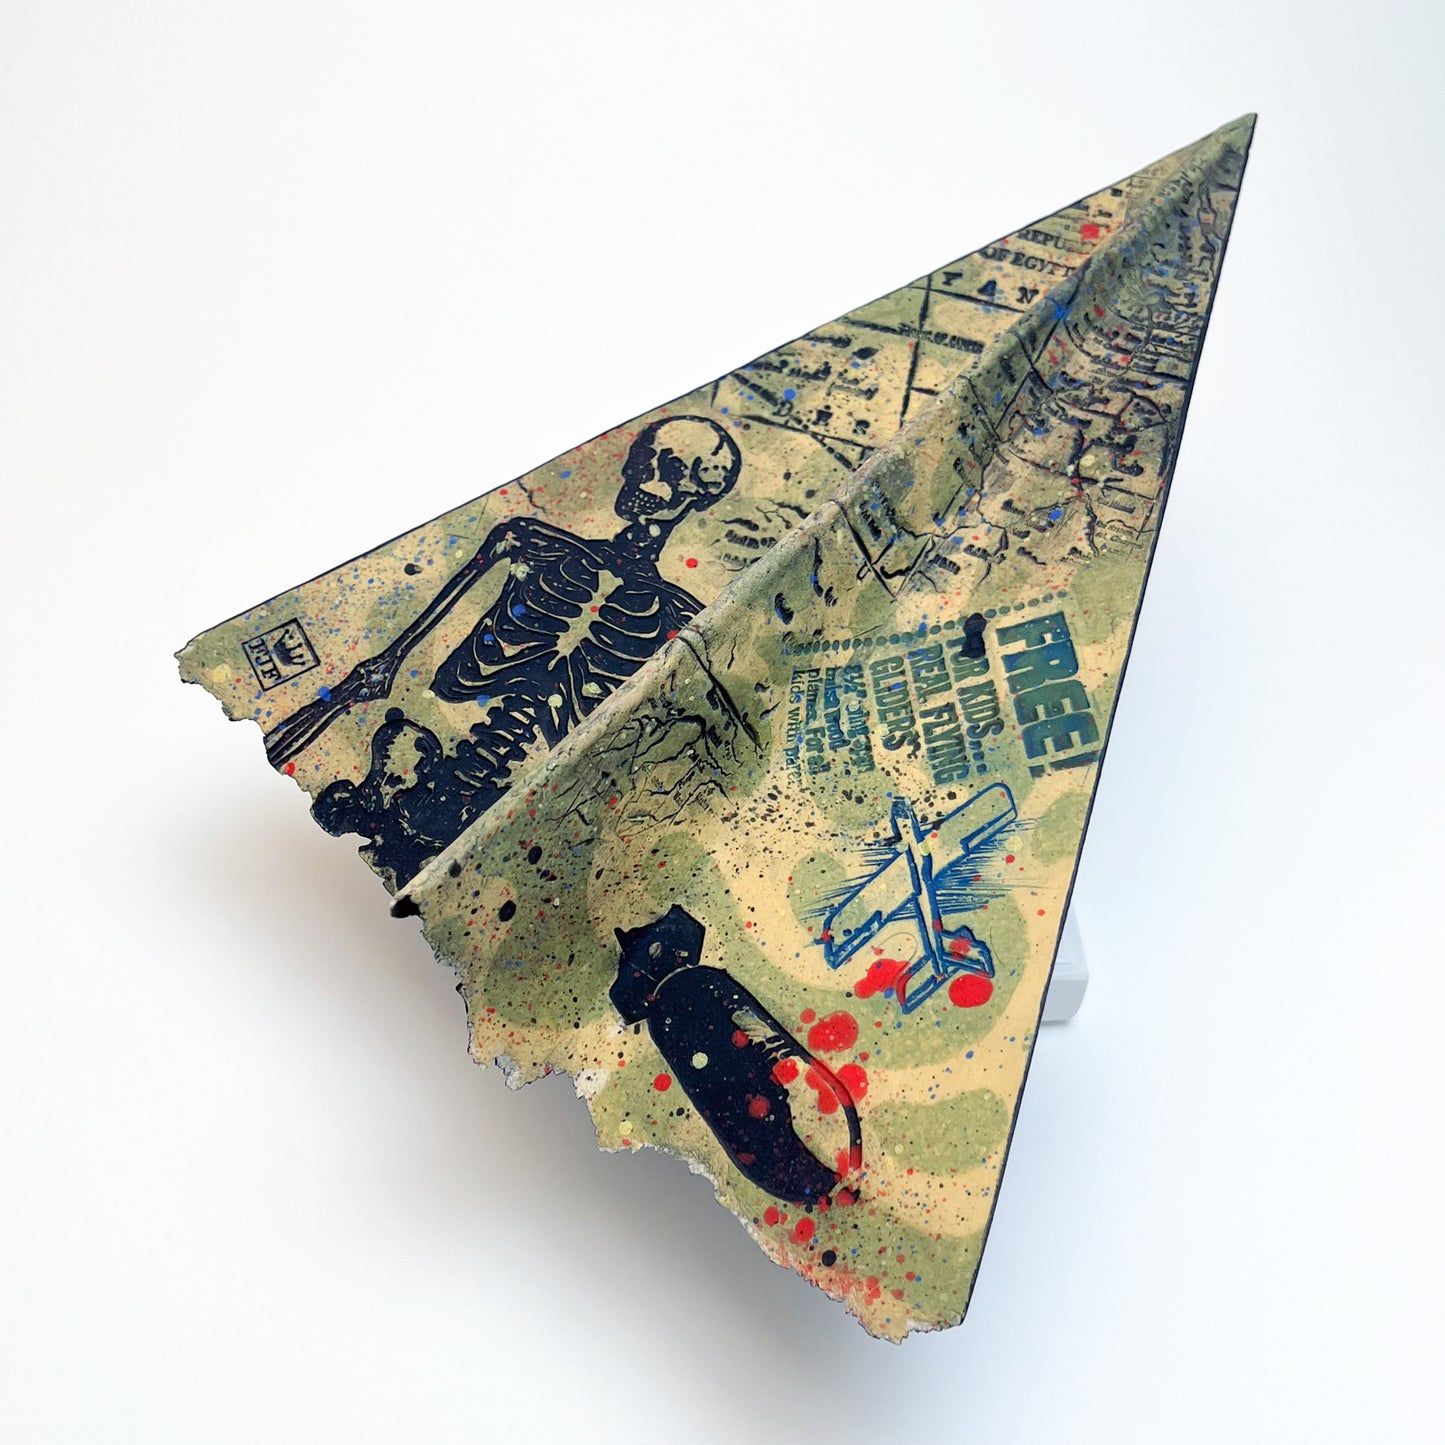 Clay "Paper" Airplane titled Free Glider – Sculpture by Frank James Fisher.